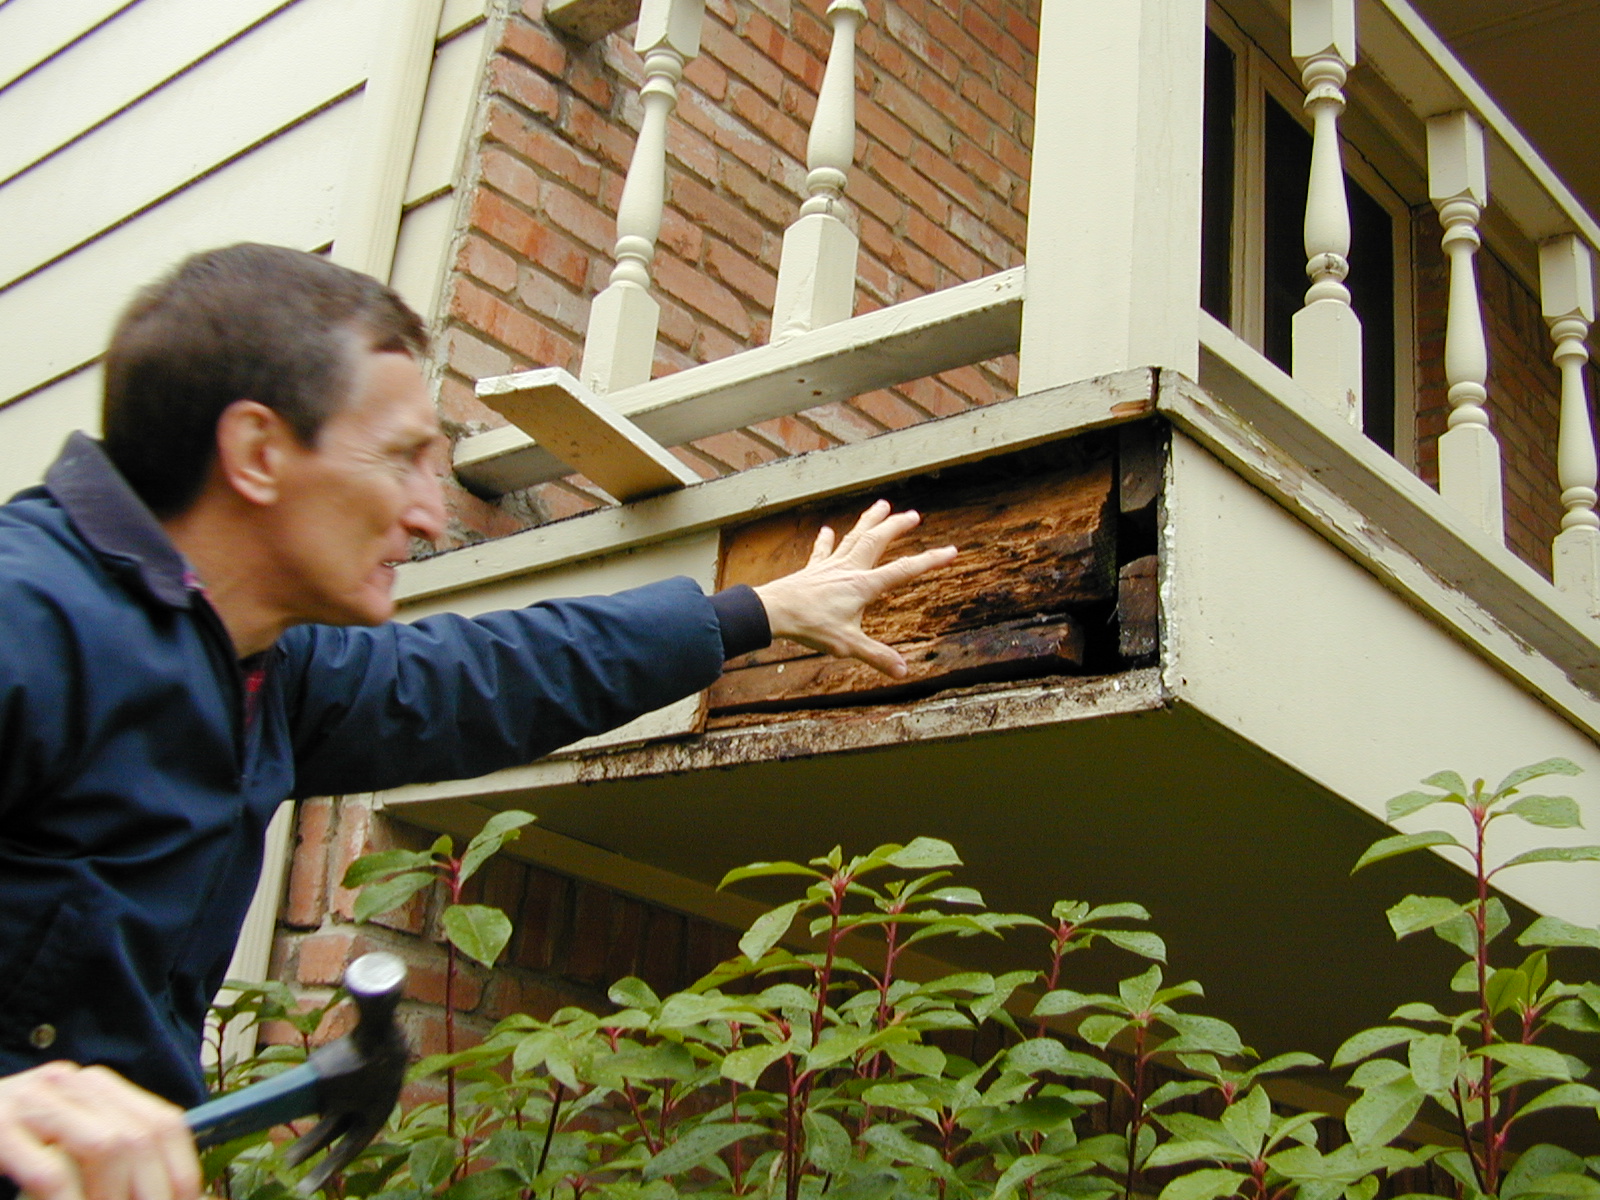 While bee swarms are generally harmless, bee colonies that get into the home can be an expensive problem.